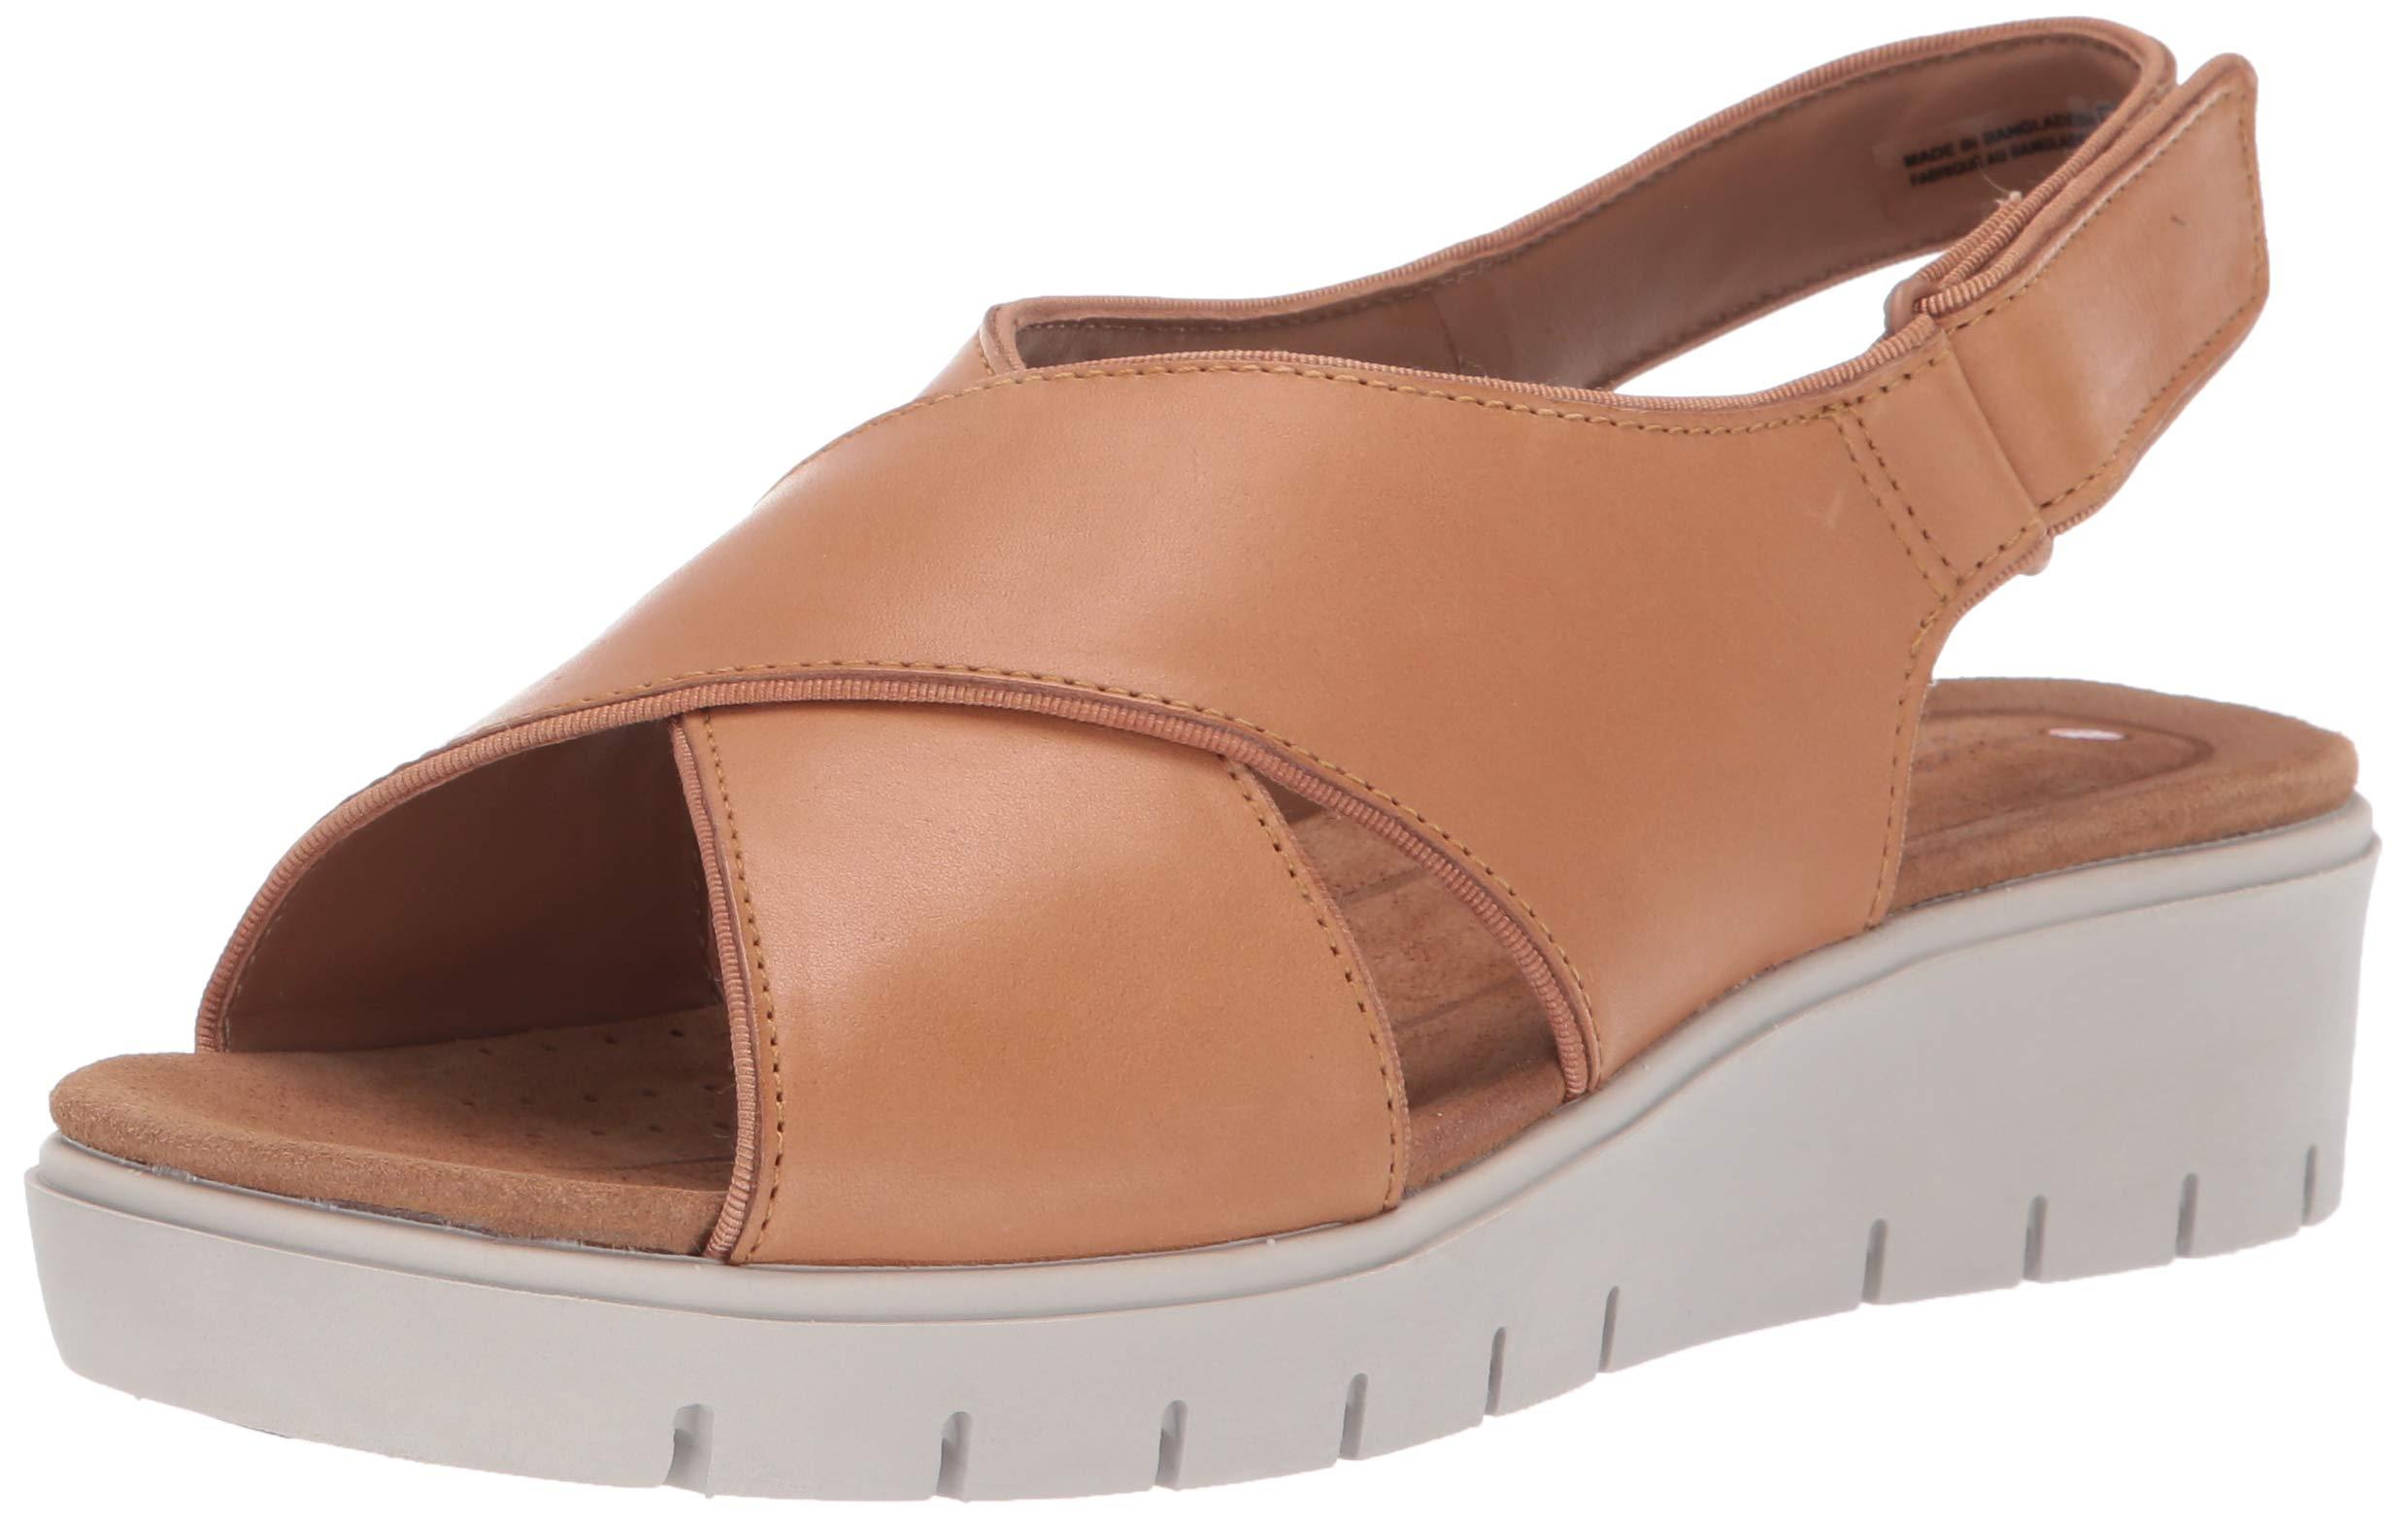 Clarks Leather Un Karely Sun Sandal in Light Tan Leather (Brown) | Lyst